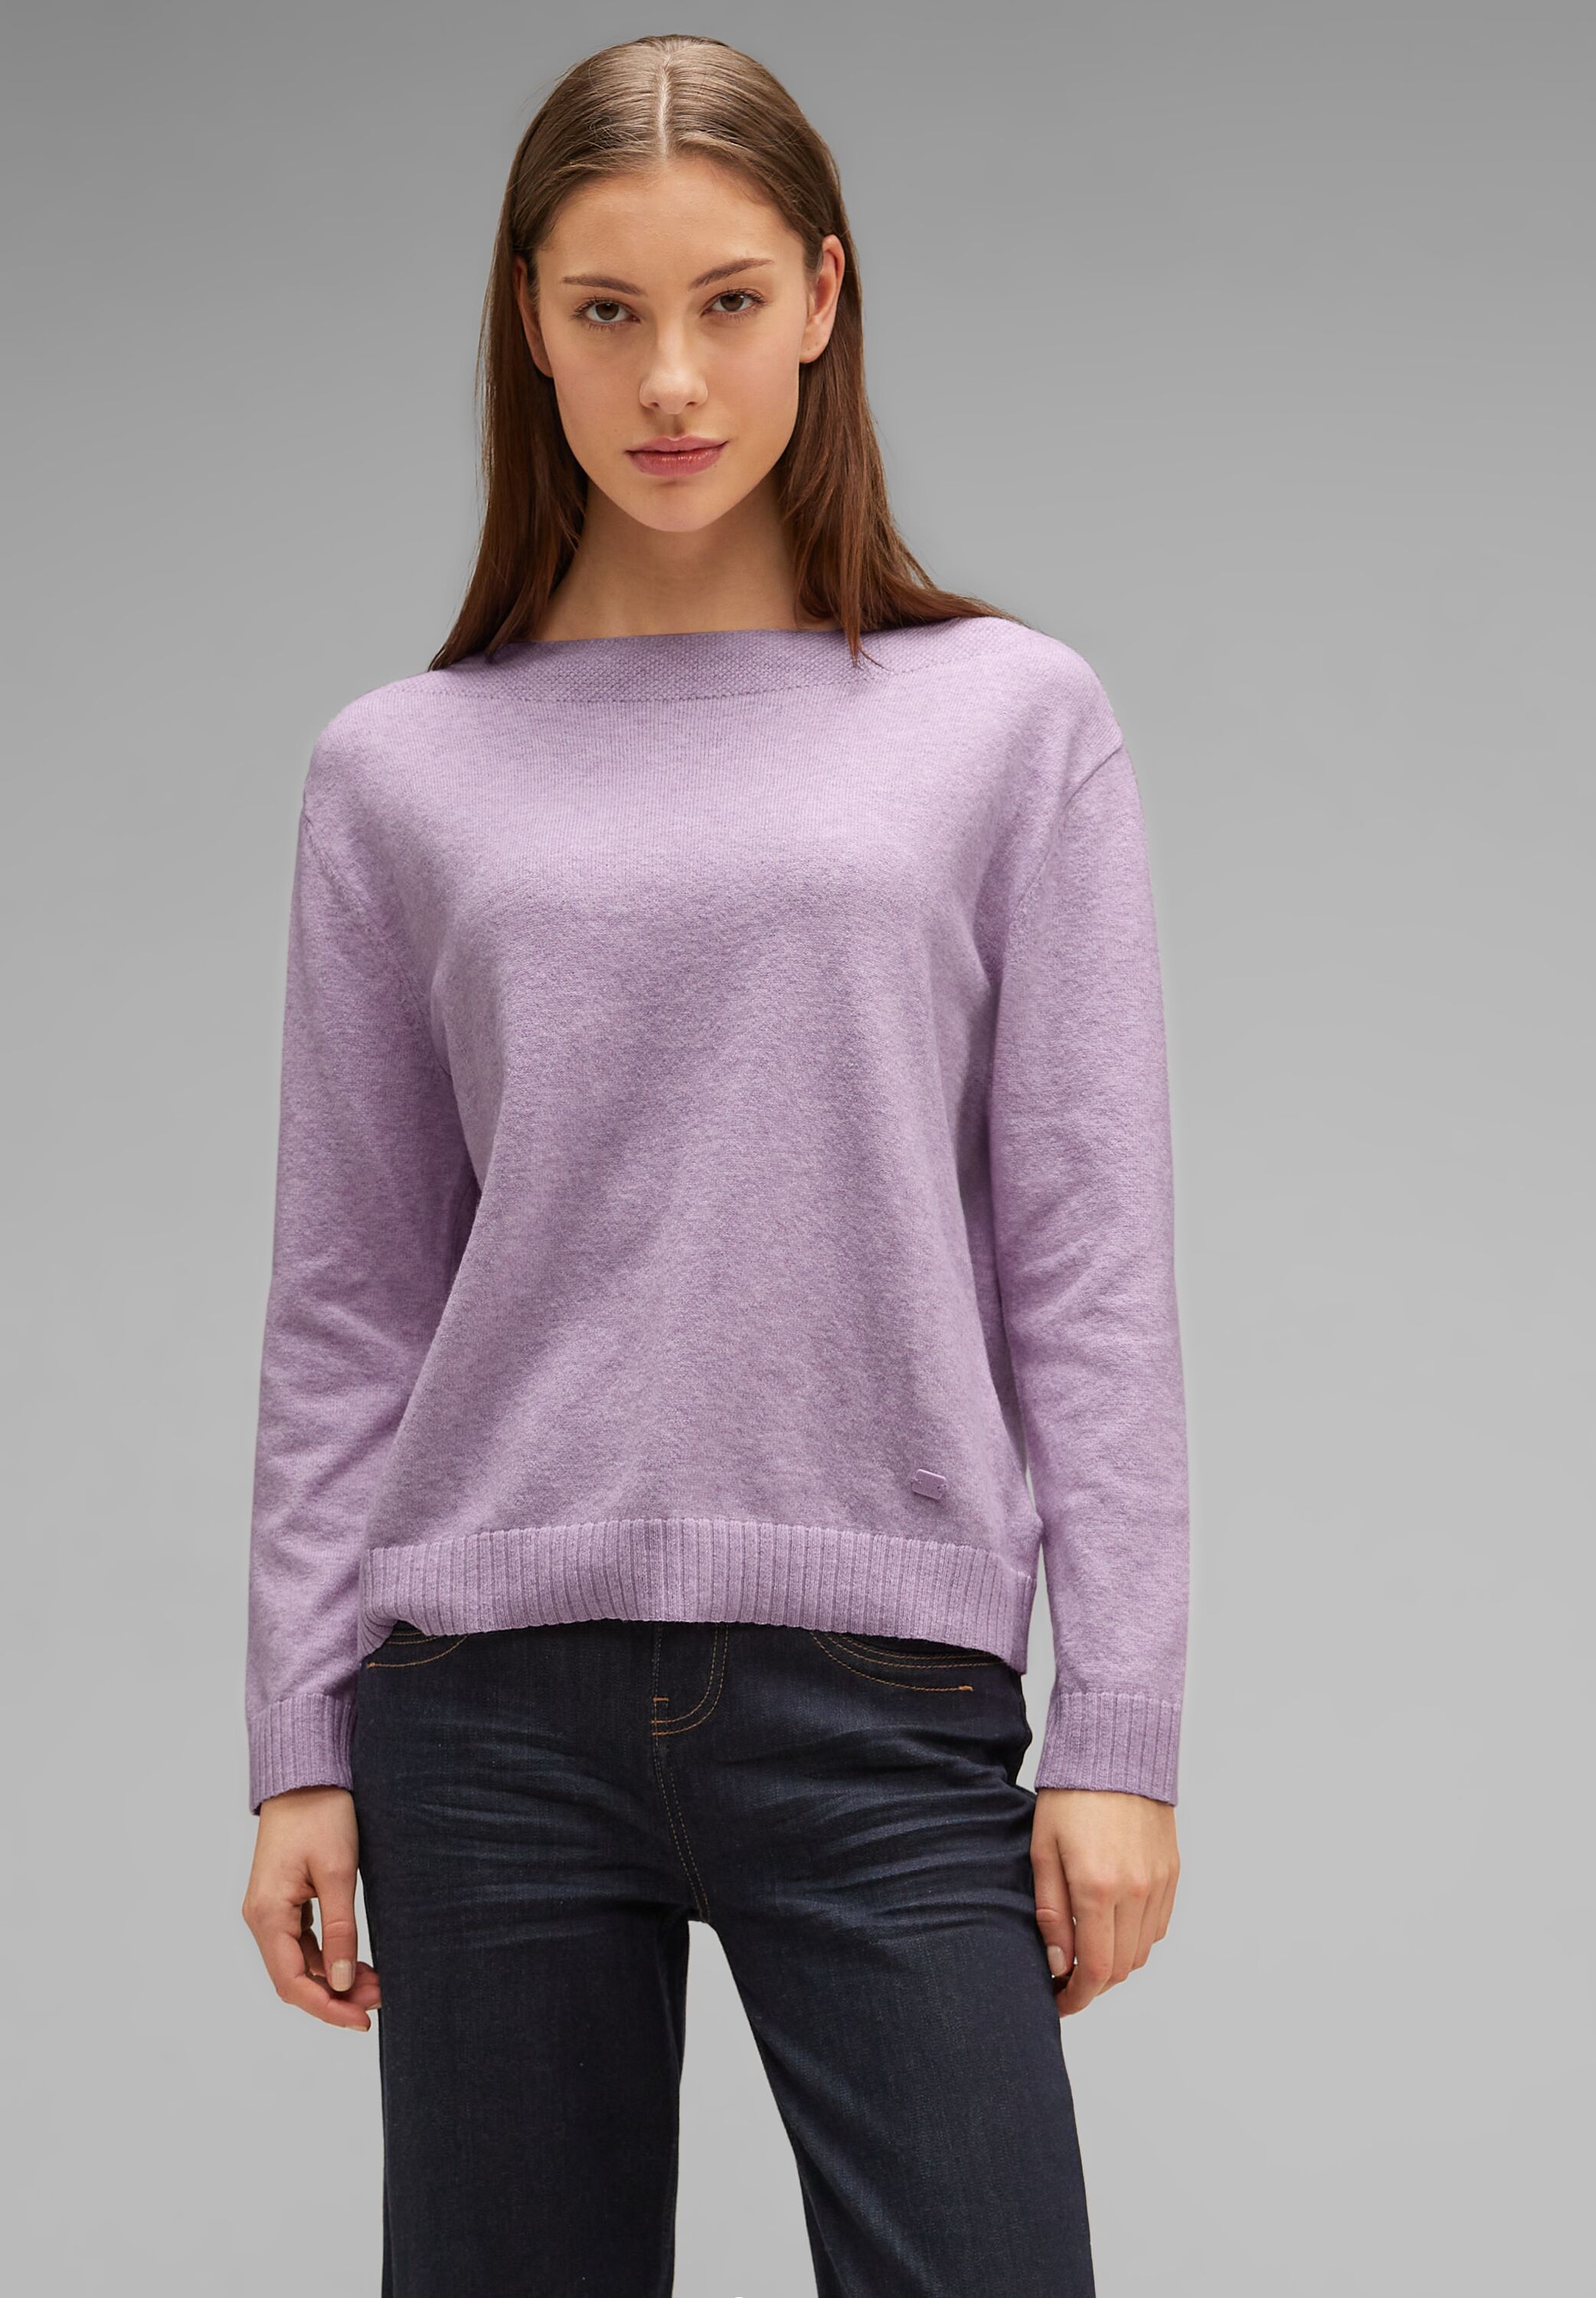 reduziert in CONCEPT Lilac SALE Soft One Street - Pullover im Melange A302414-15290 Pure Mode